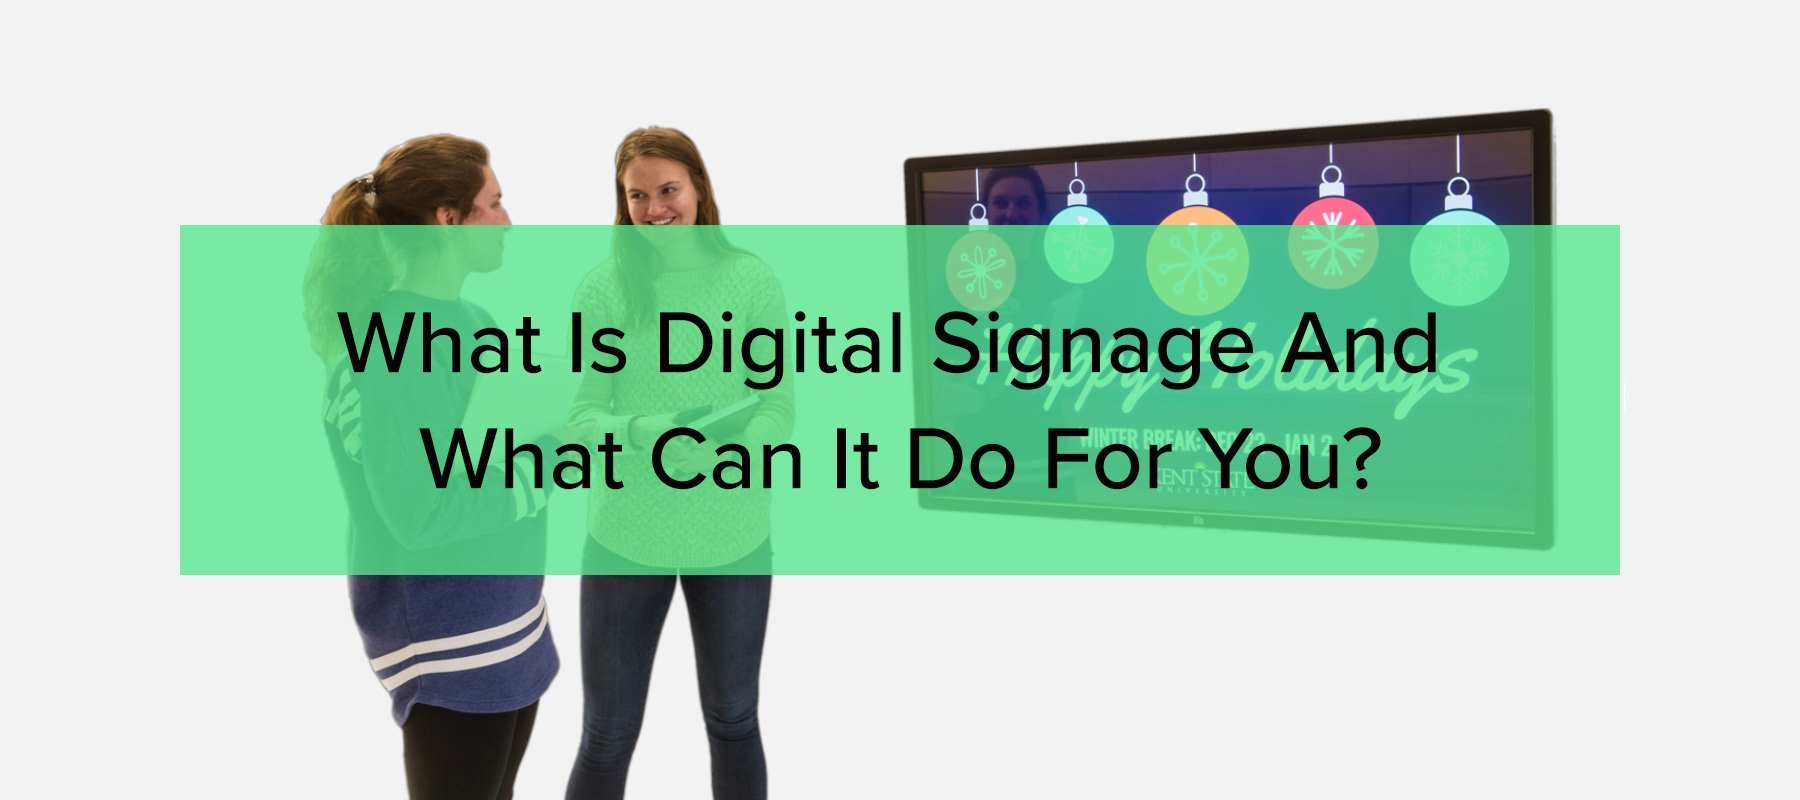 What is Digital Signage